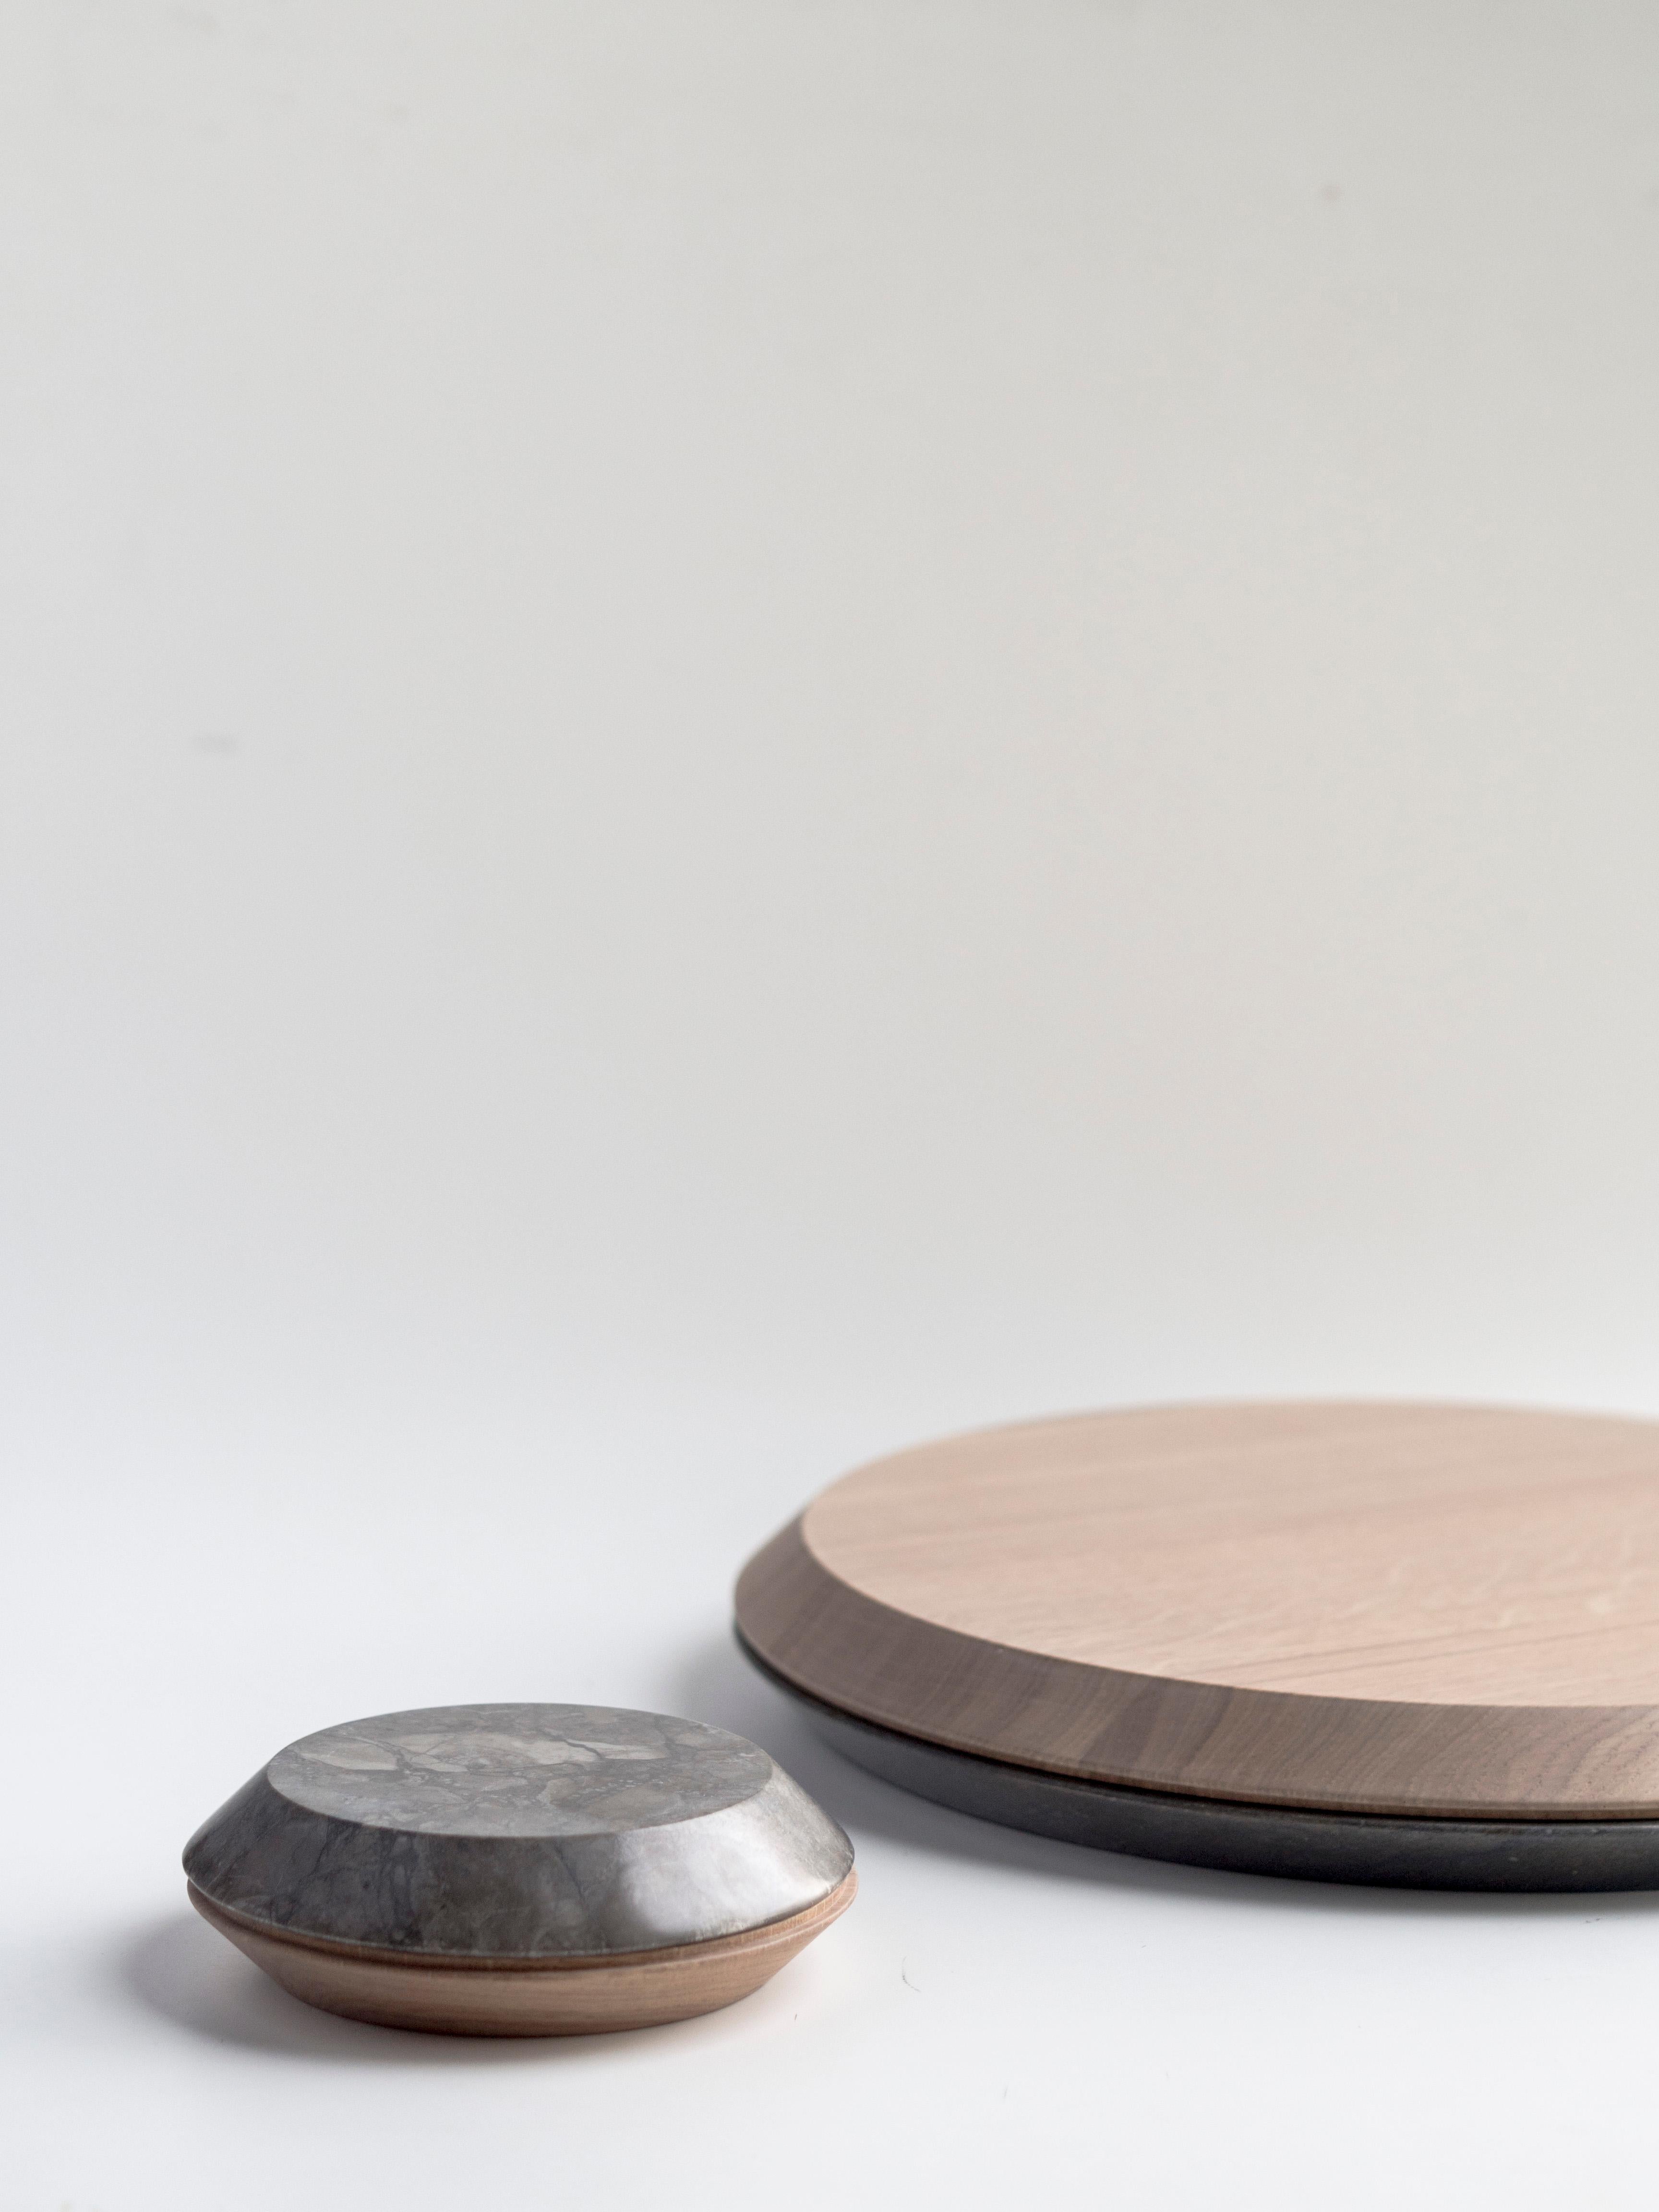 A collection of cutting boards in Sicilian marble and natural oak obtained with craftsmanship express parallel stories, narratives of the material and functional sense; they are 